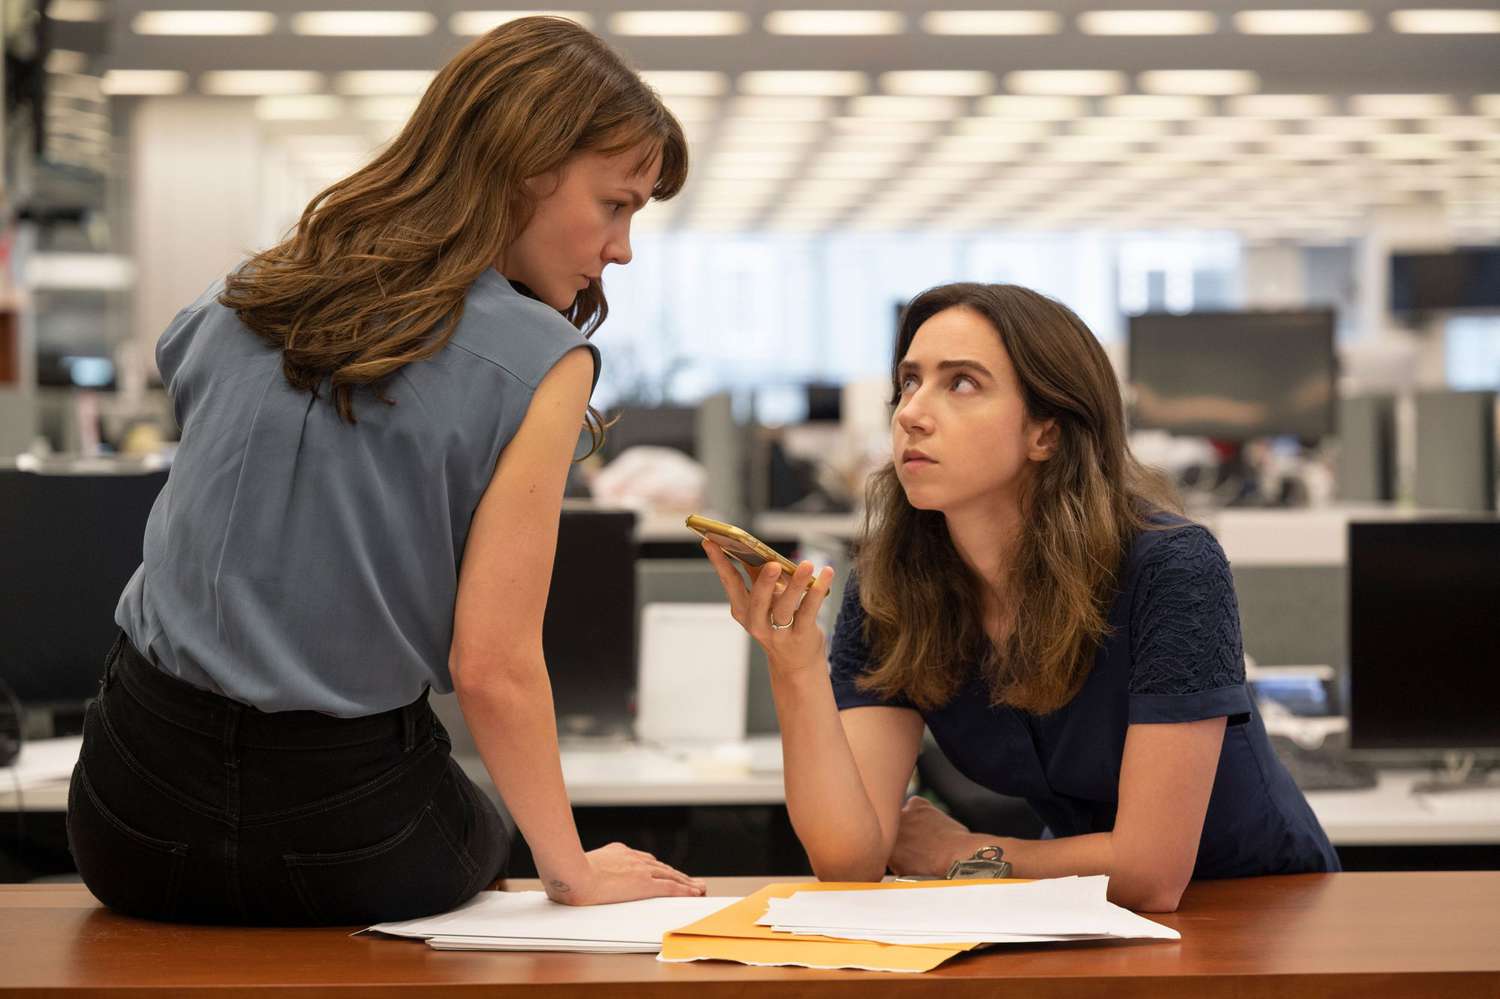 (from left) Megan Twohey (Carey Mulligan) and Jodi Kantor (Zoe Kazan) in She Said, directed by Maria Schrader.